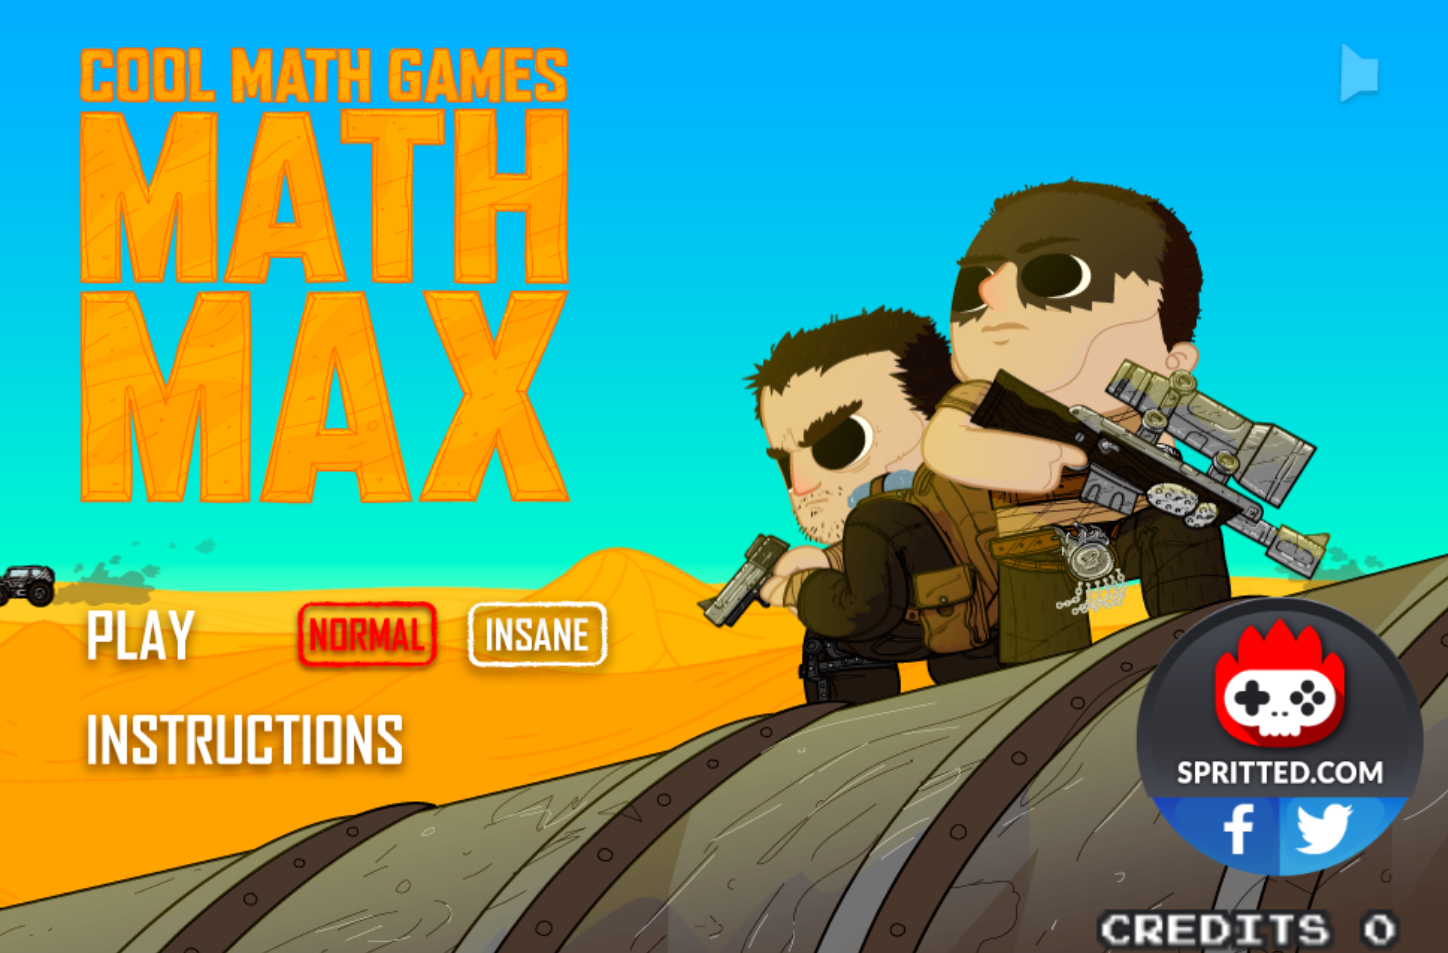 Cool Math Games: Math Max [Phaser][Completed] - Game Showcase - HTML5 ...